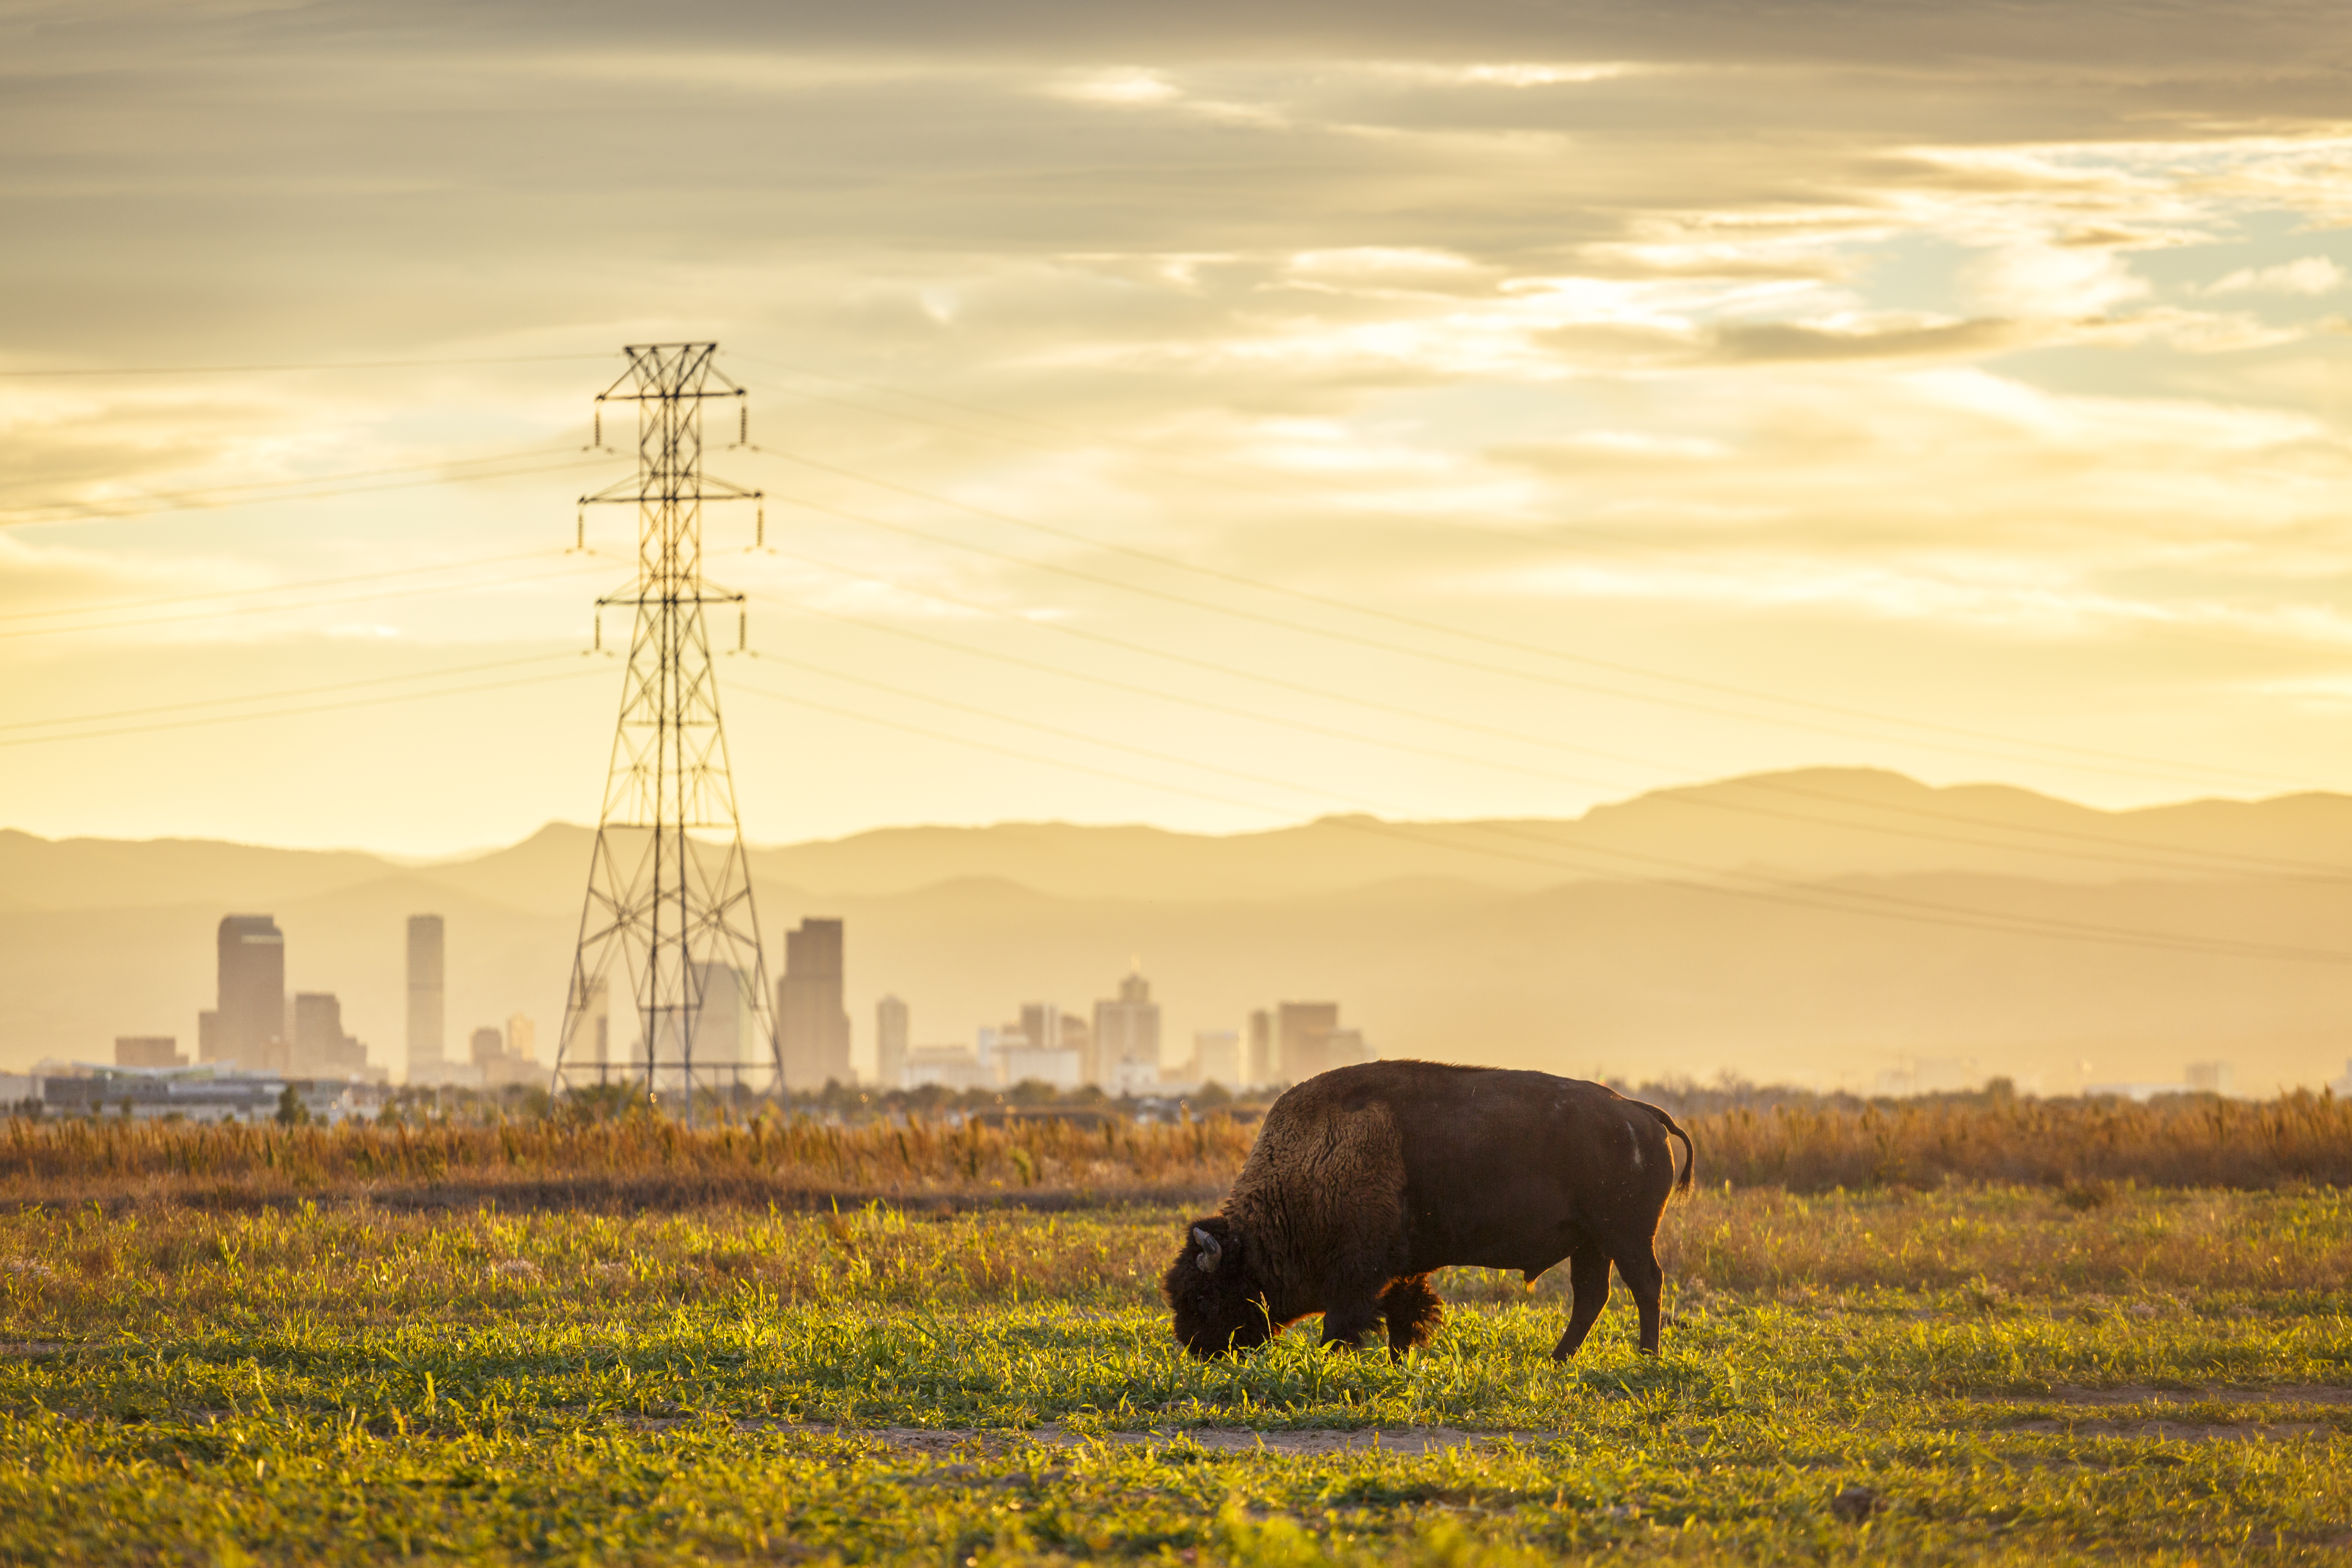 A bison grazing in the foreground with mountains and a city and electrical infrastructure in the background